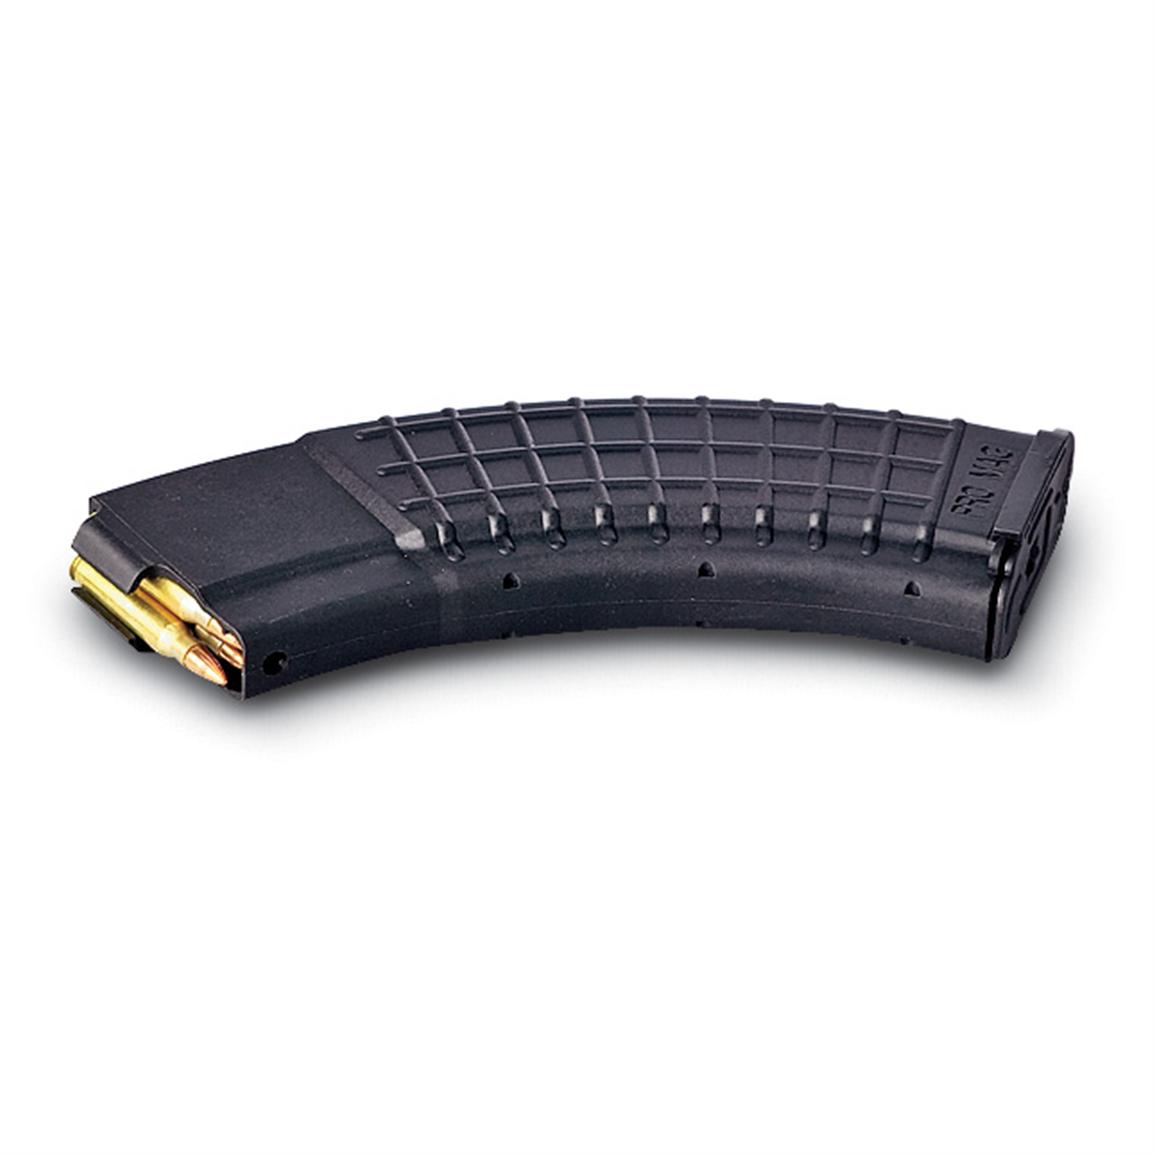 3 Pk. 30 rd. Polymer Ruger® Mini Thirty® Mags 106847, Rifle Mags